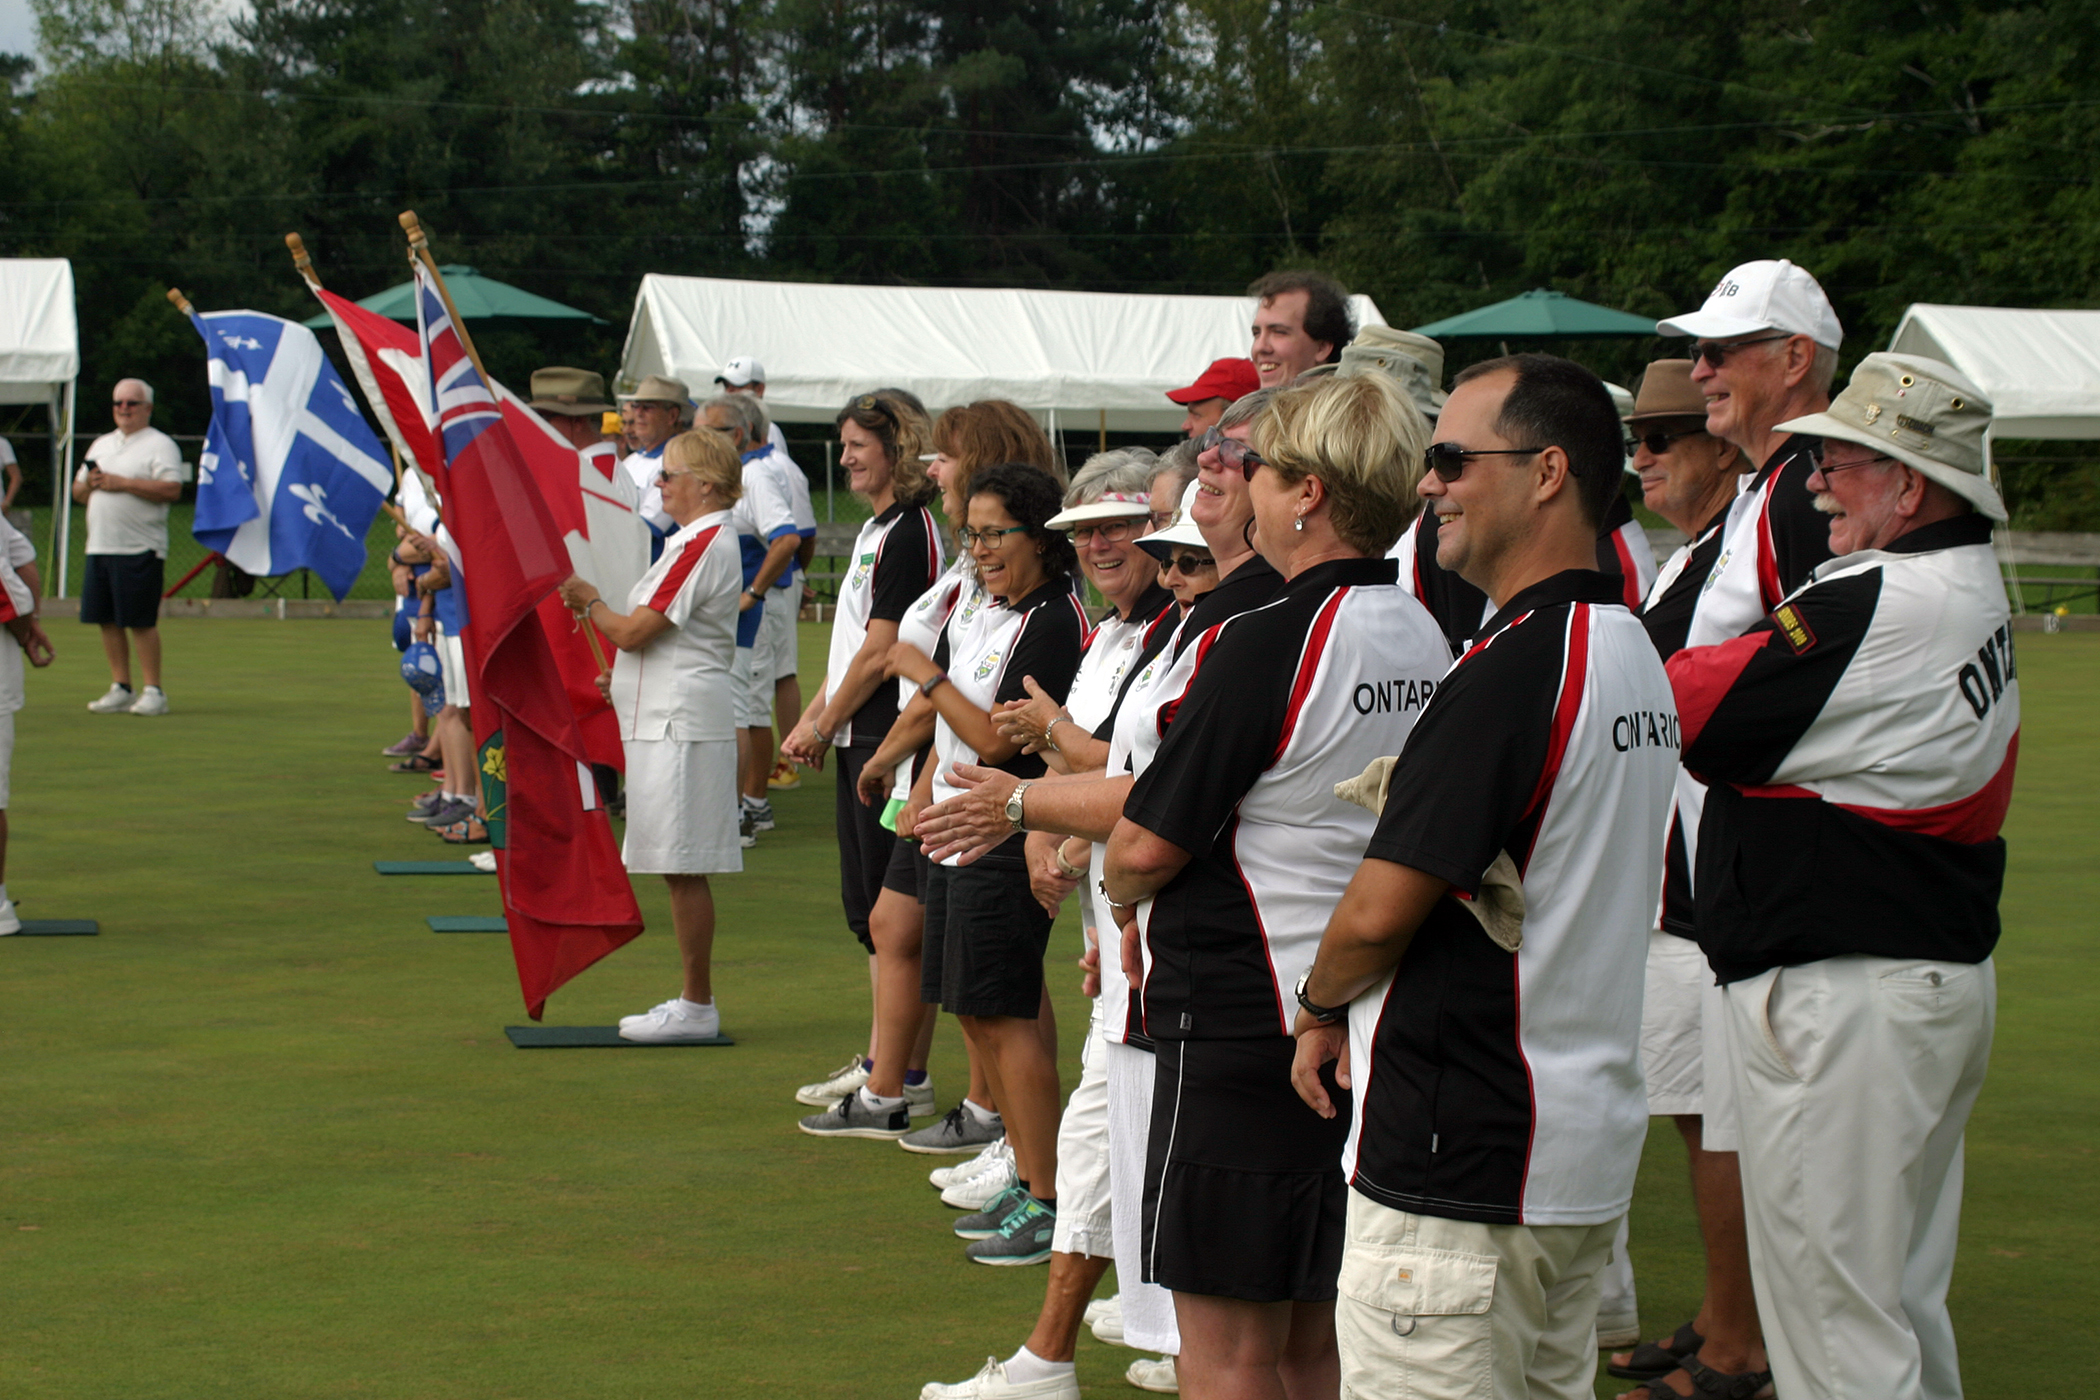 Galetta Lawn Bowls disbands after 32 years